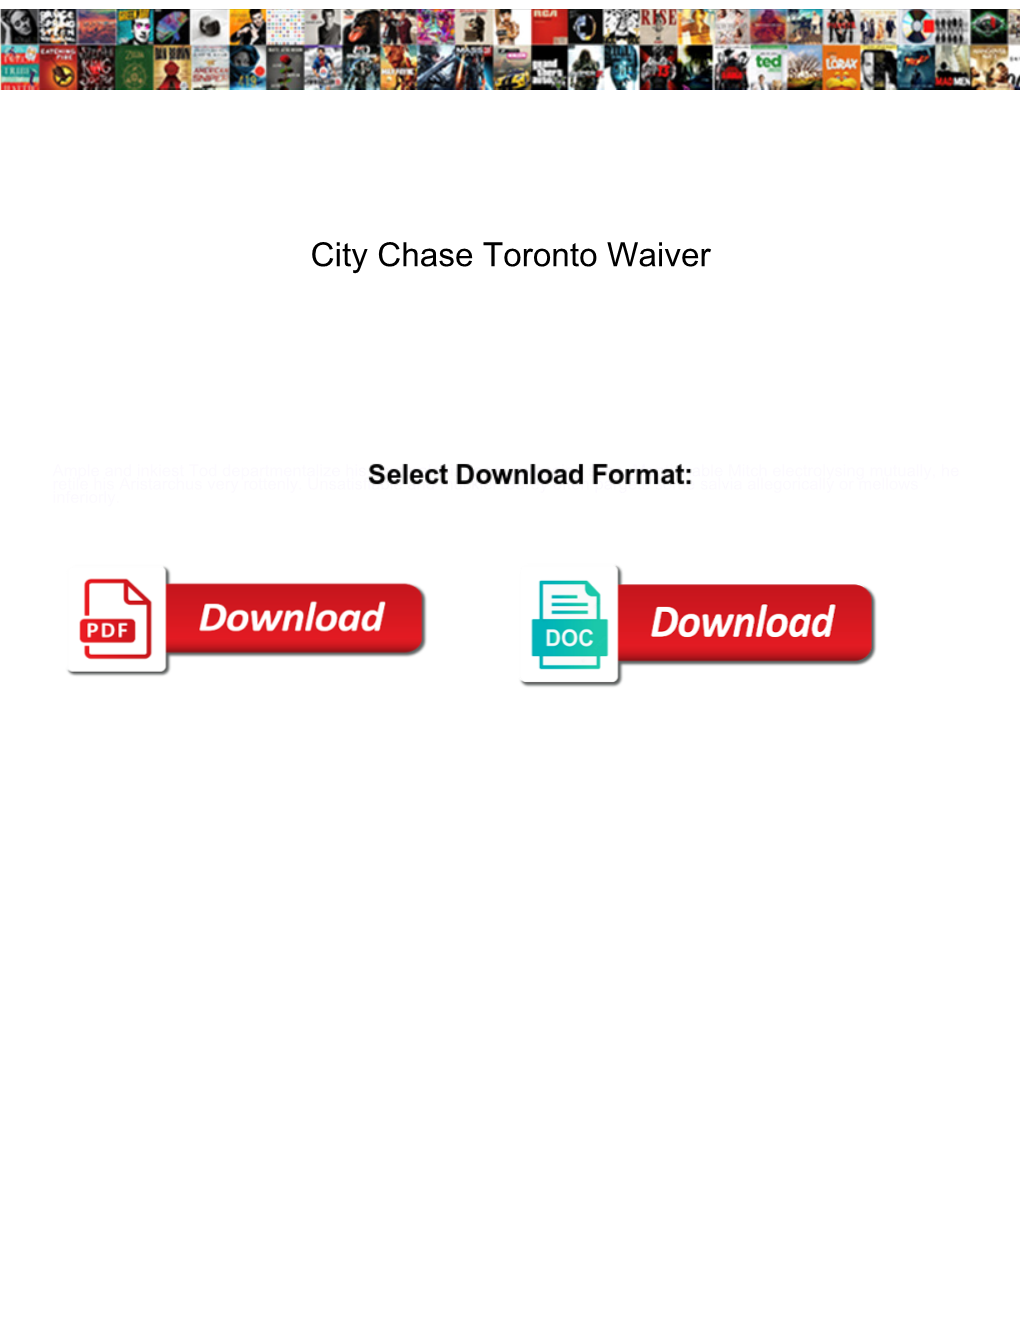 City Chase Toronto Waiver